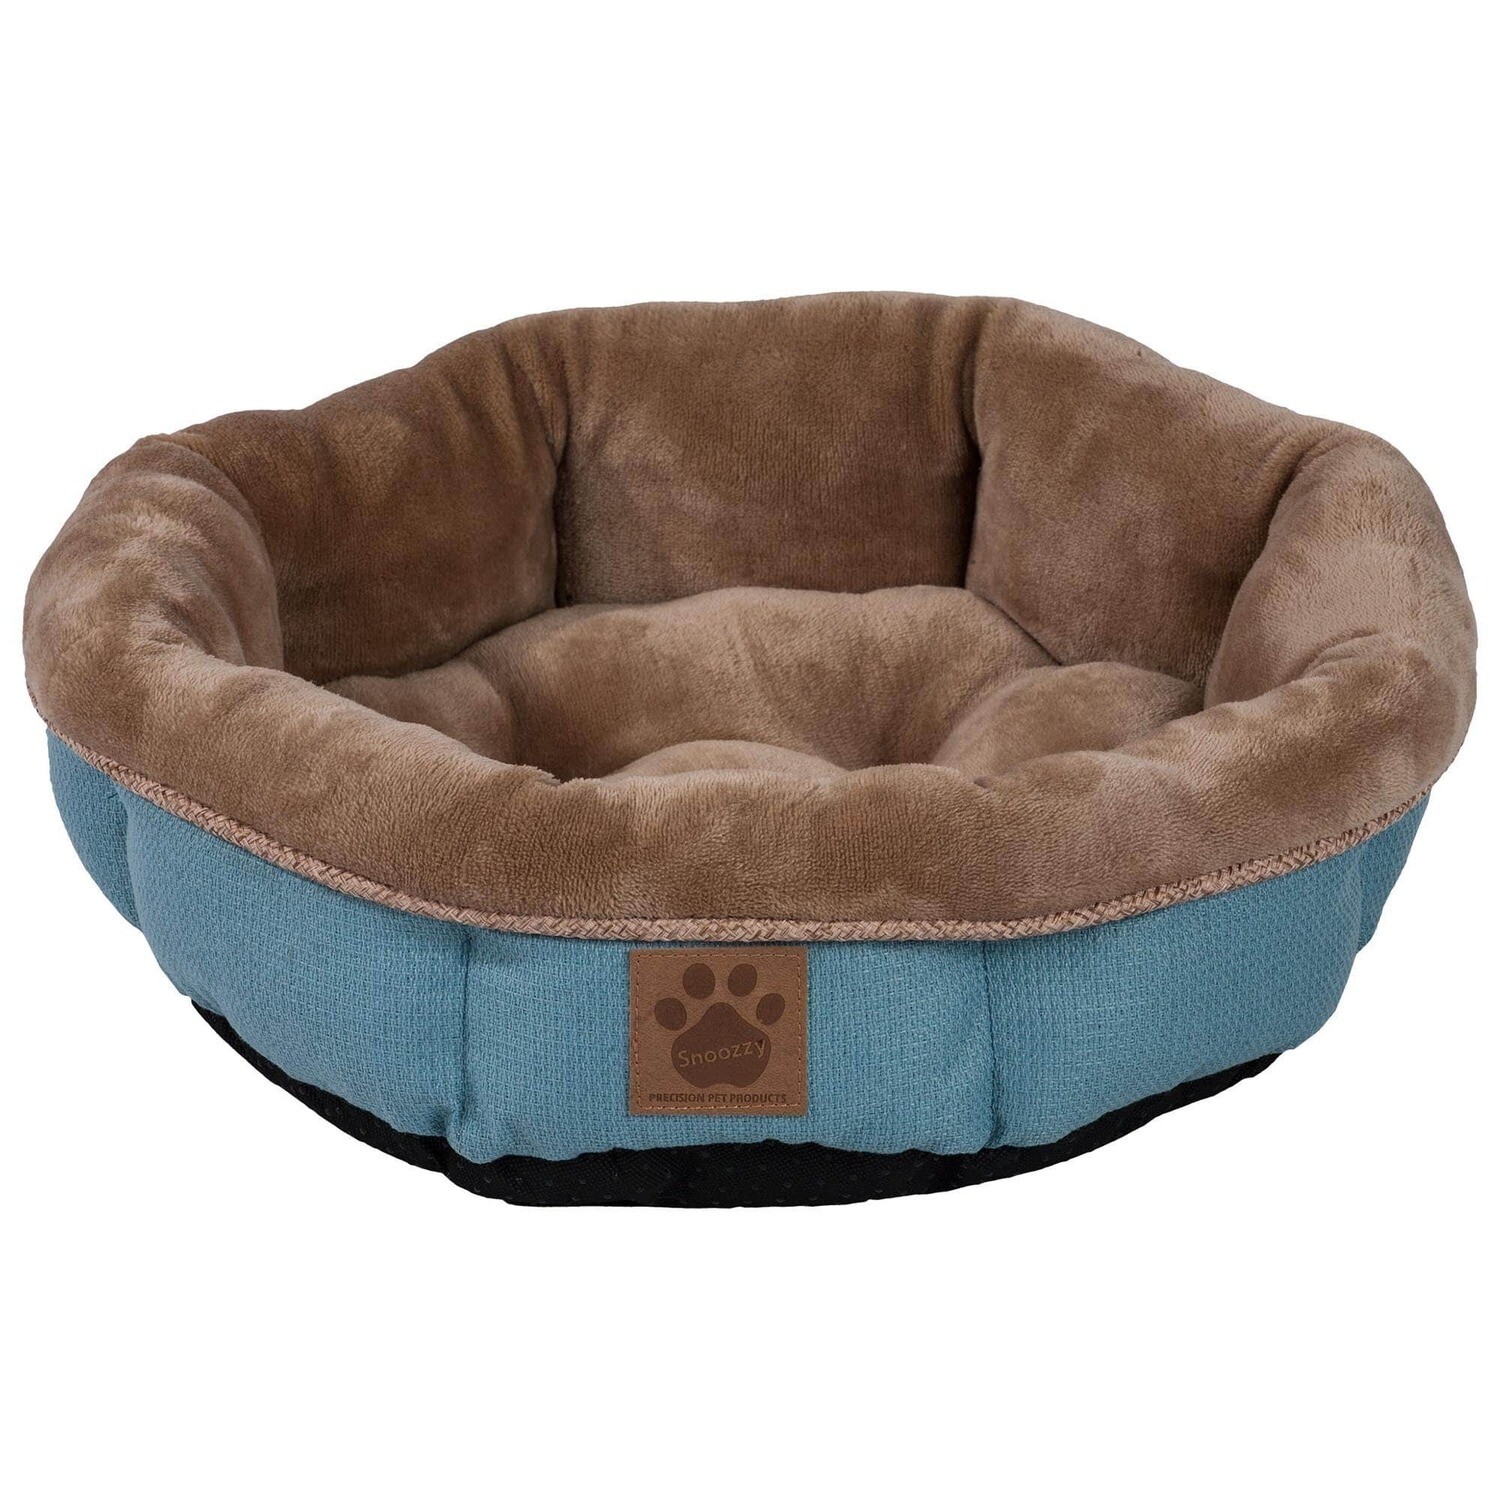 SNOOZZY RUSTIC ELEGANCE ROUND SHEARLING BED TEAL 17X4.5IN.